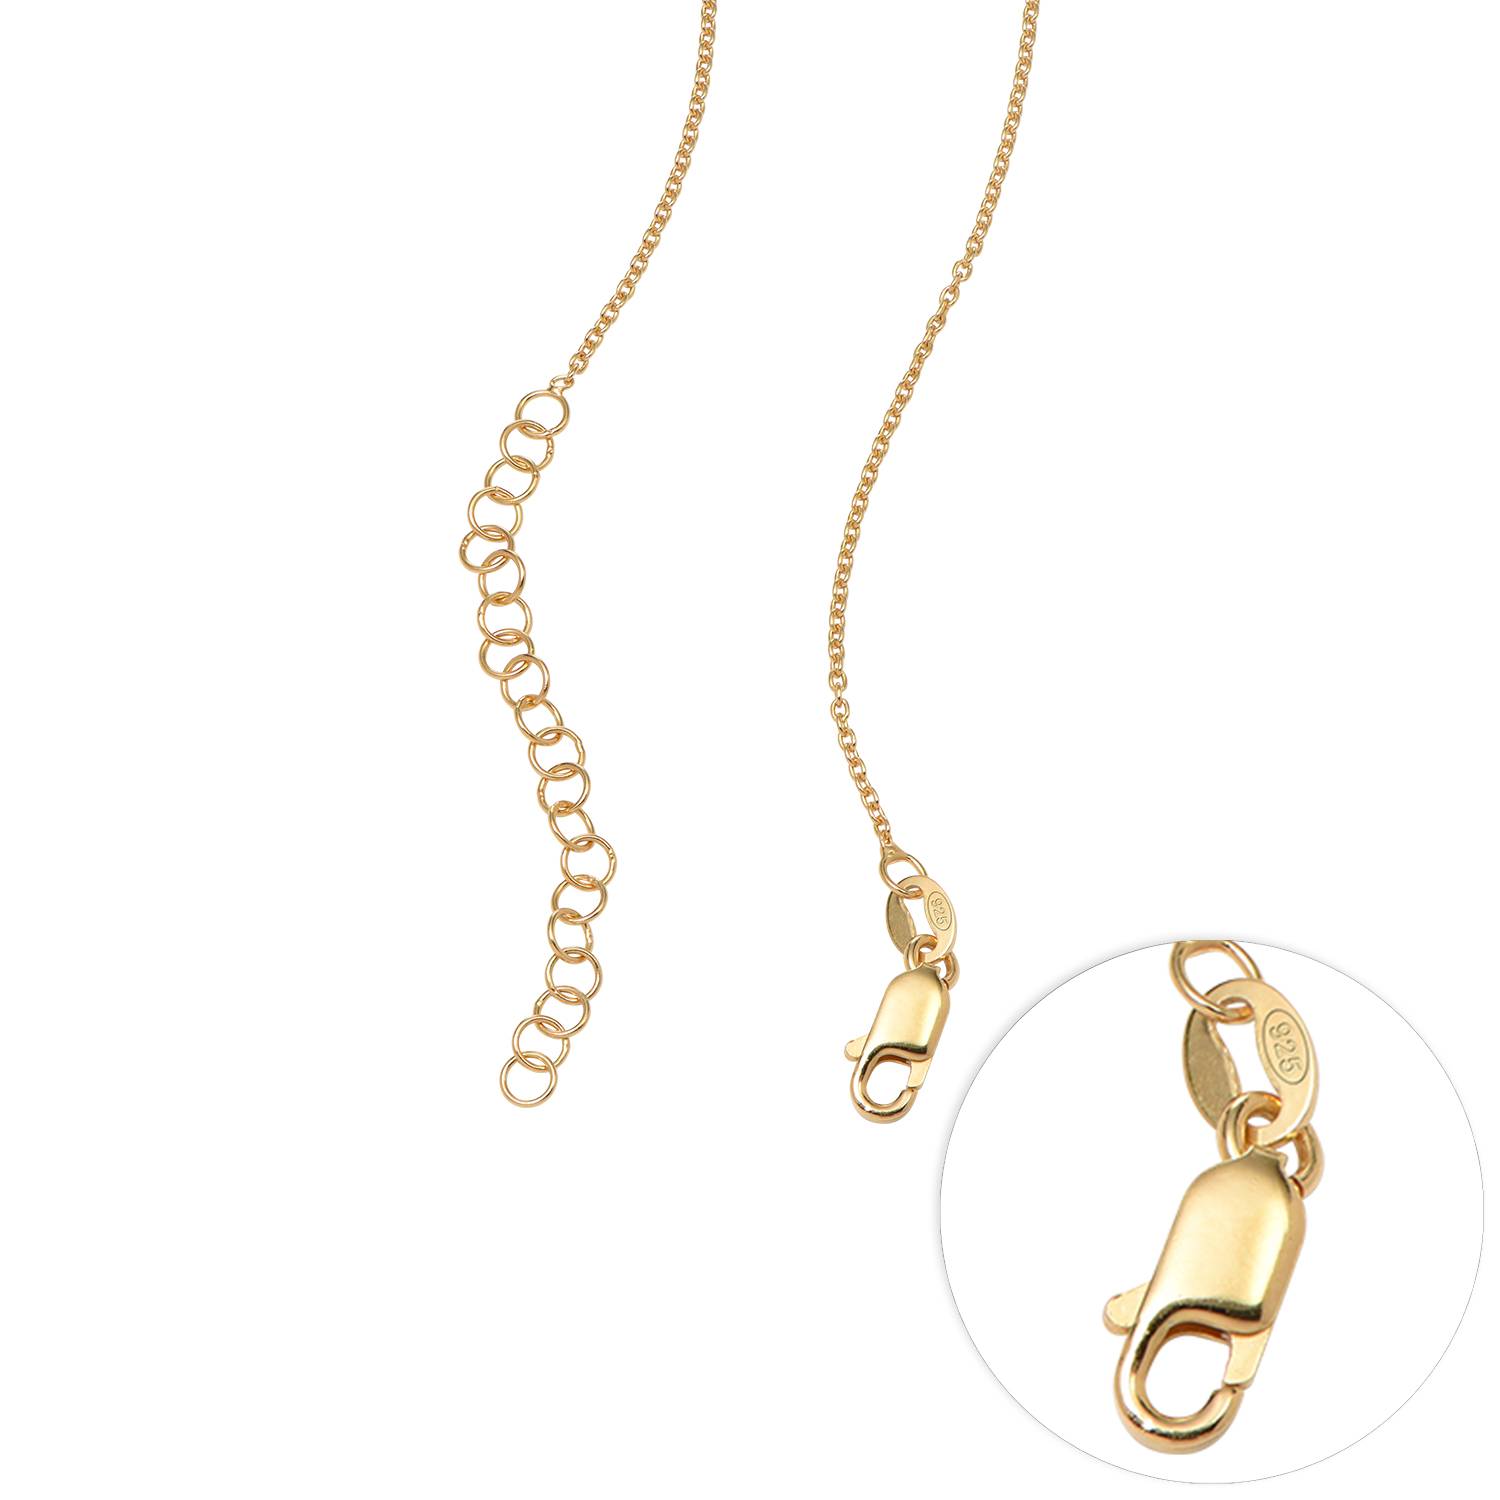 Claire Interlocking Hearts Necklace with Diamonds in 18ct Gold Plating-2 product photo